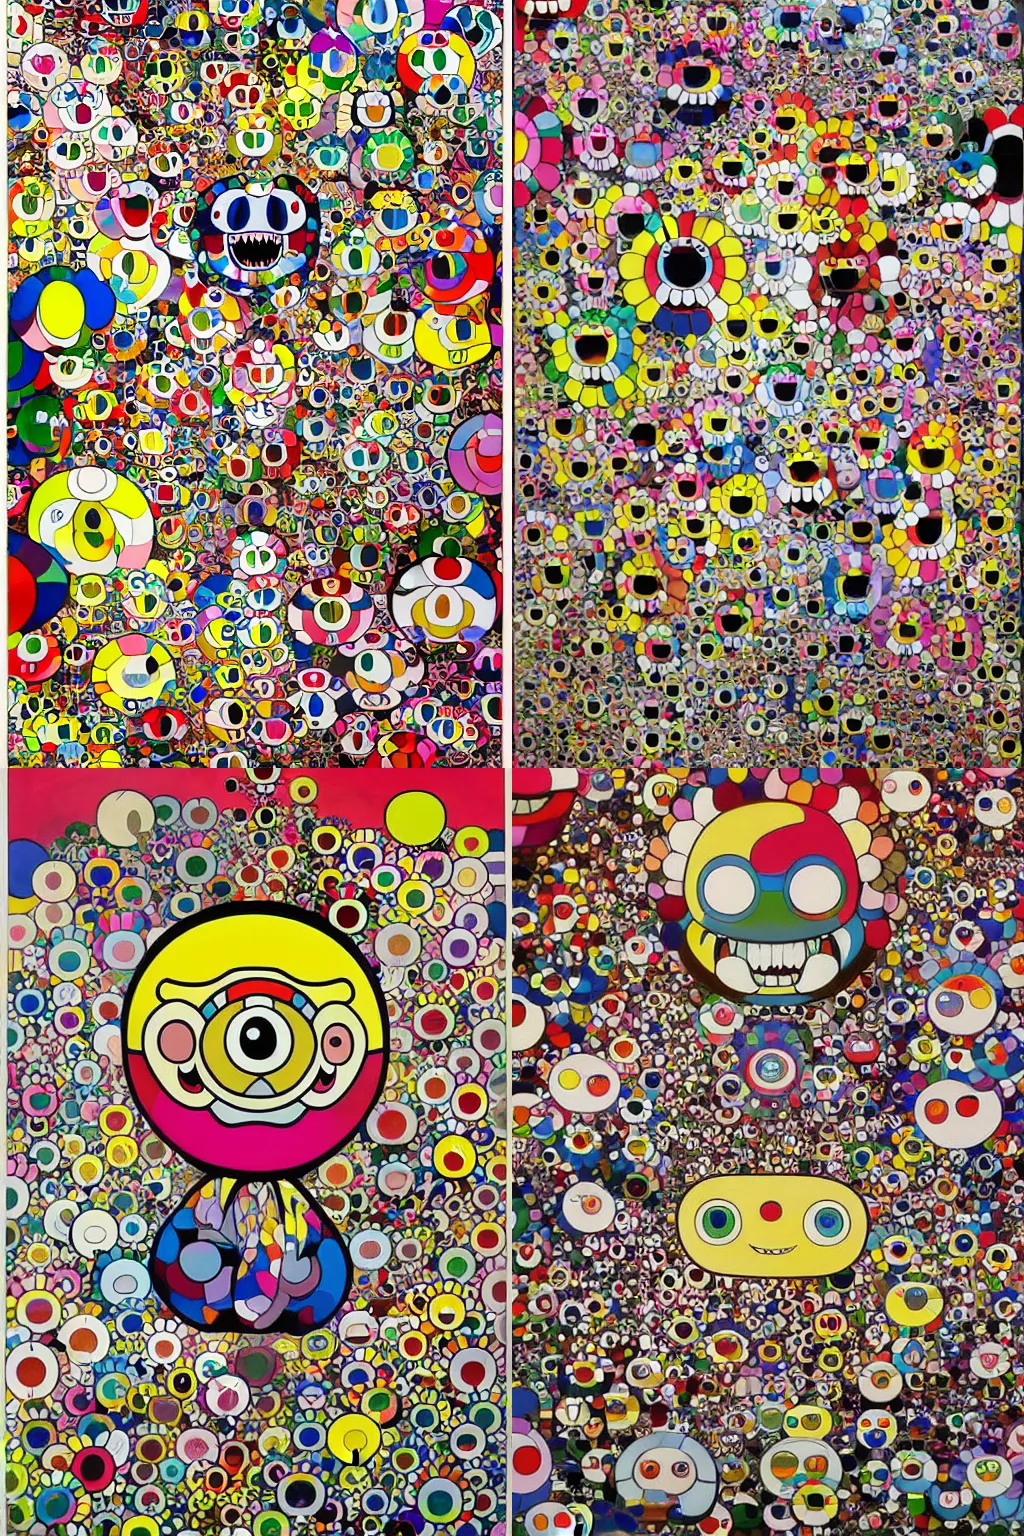 Prompt: a painting of a monster with many different colors, a pop art painting by Takashi Murakami, featured on pixiv, pop surrealism, official art, 2d game art, maximalist, poster art, gutai group, panfuturism, lowbrow